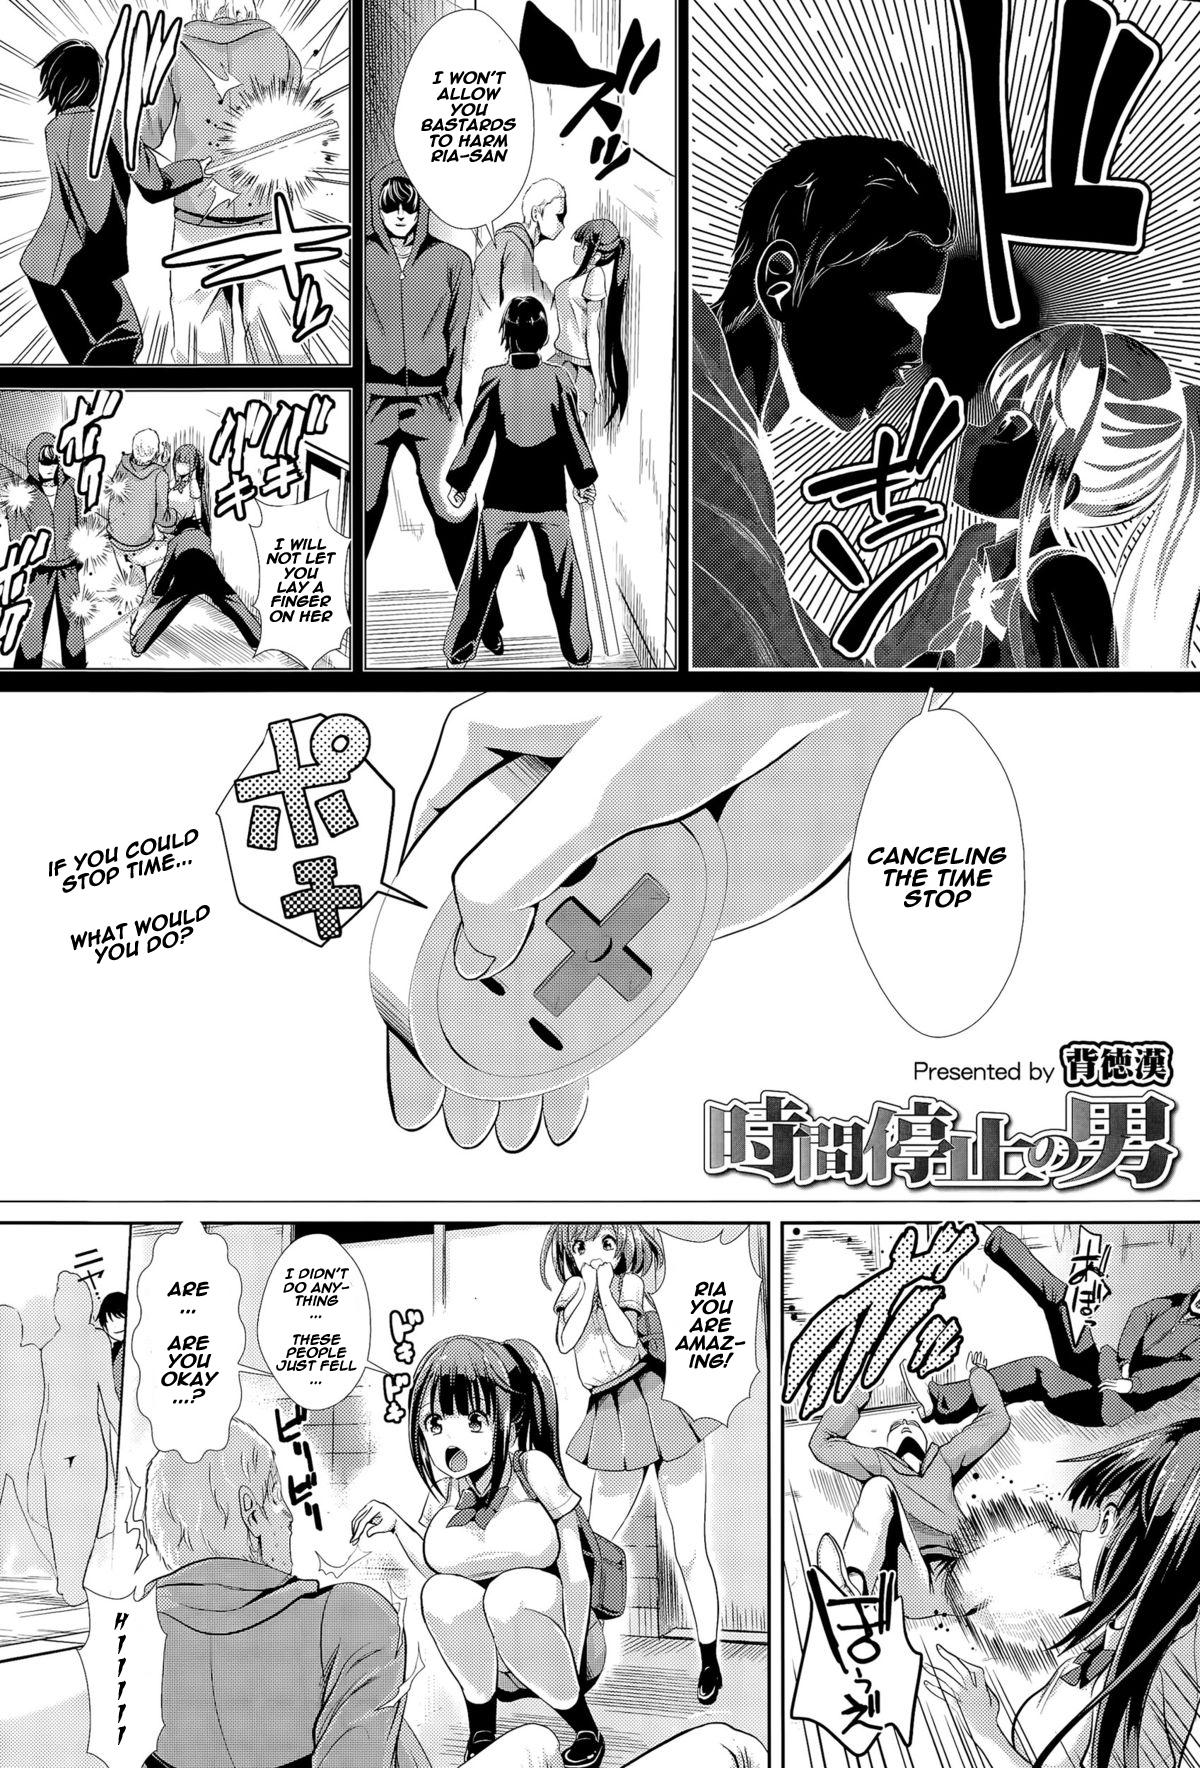 Bubble Butt Jikan Teishi no Otoko | The journal of the man who could stop time Blackcocks - Page 2